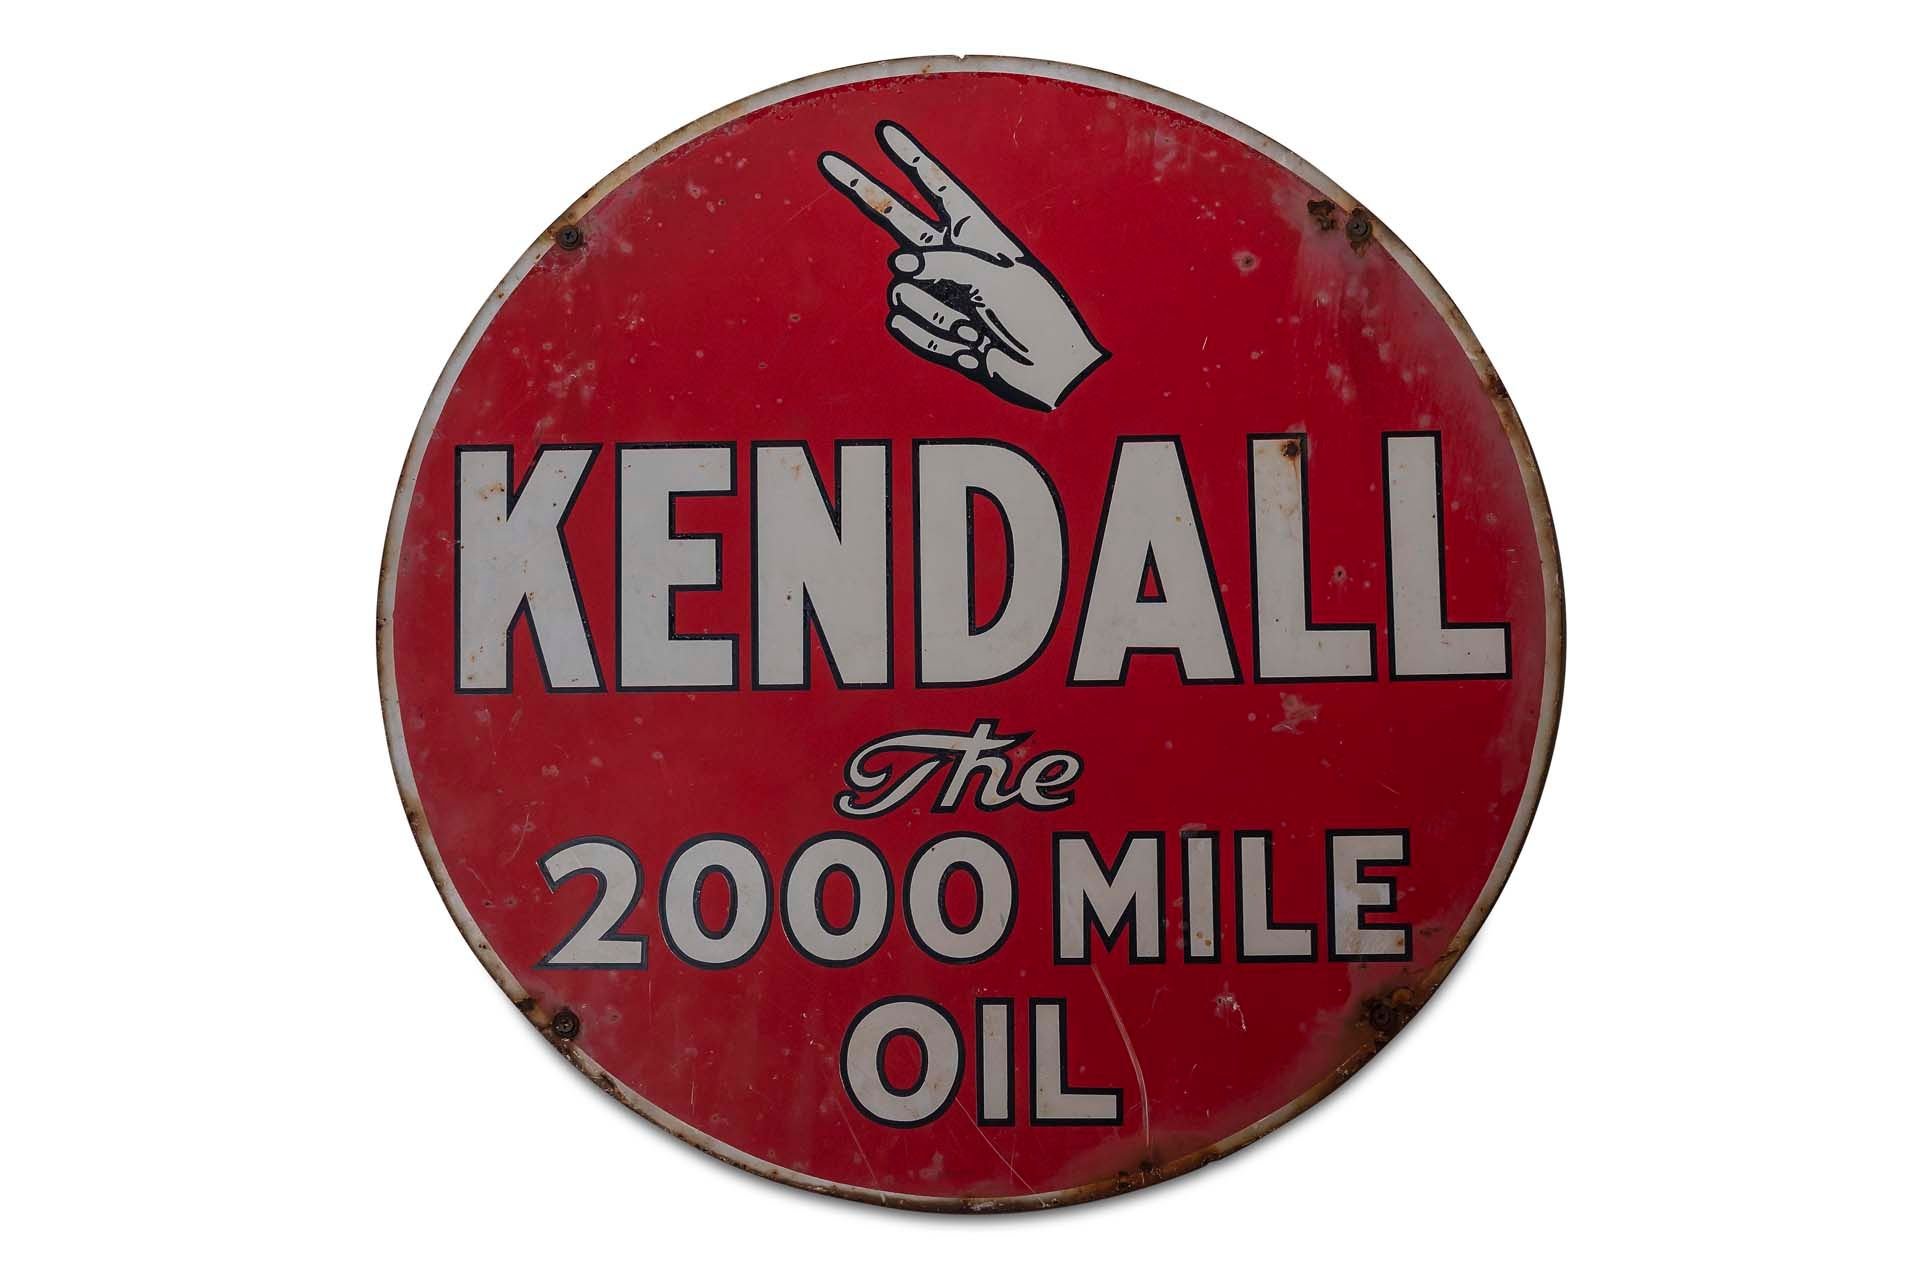 For Sale 'Kendall The 2000 Mile Oil' Porcelain Sign